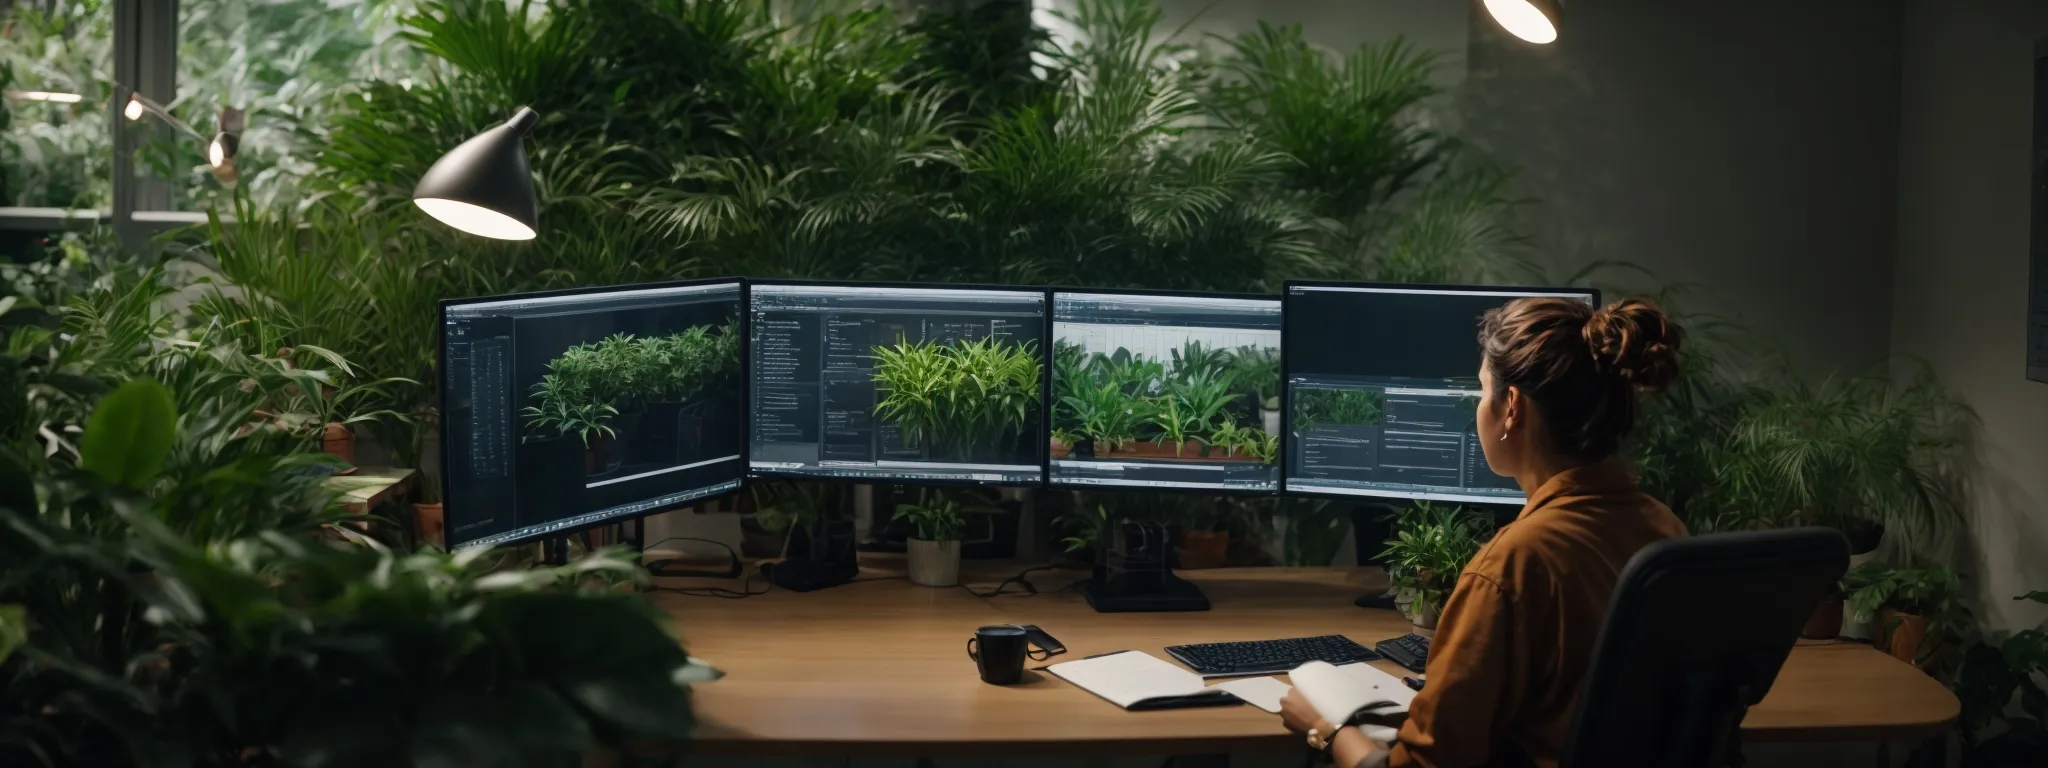 a person sitting at a spacious desk with dual computer monitors, surrounded by plant life, depicting a serene yet focused work environment for an seo freelancer.